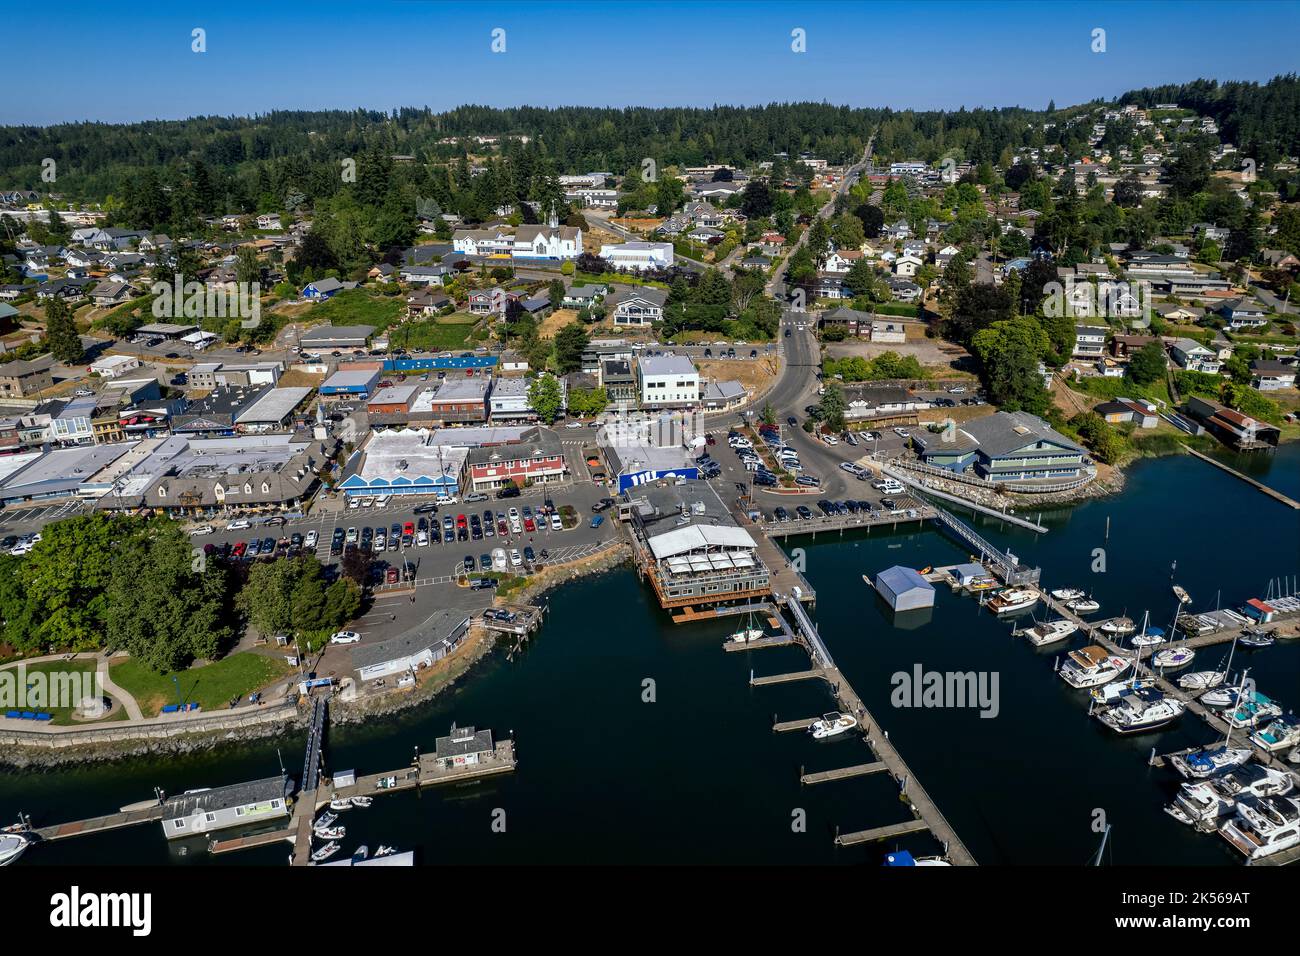 County of kitsap hires stock photography and images Alamy